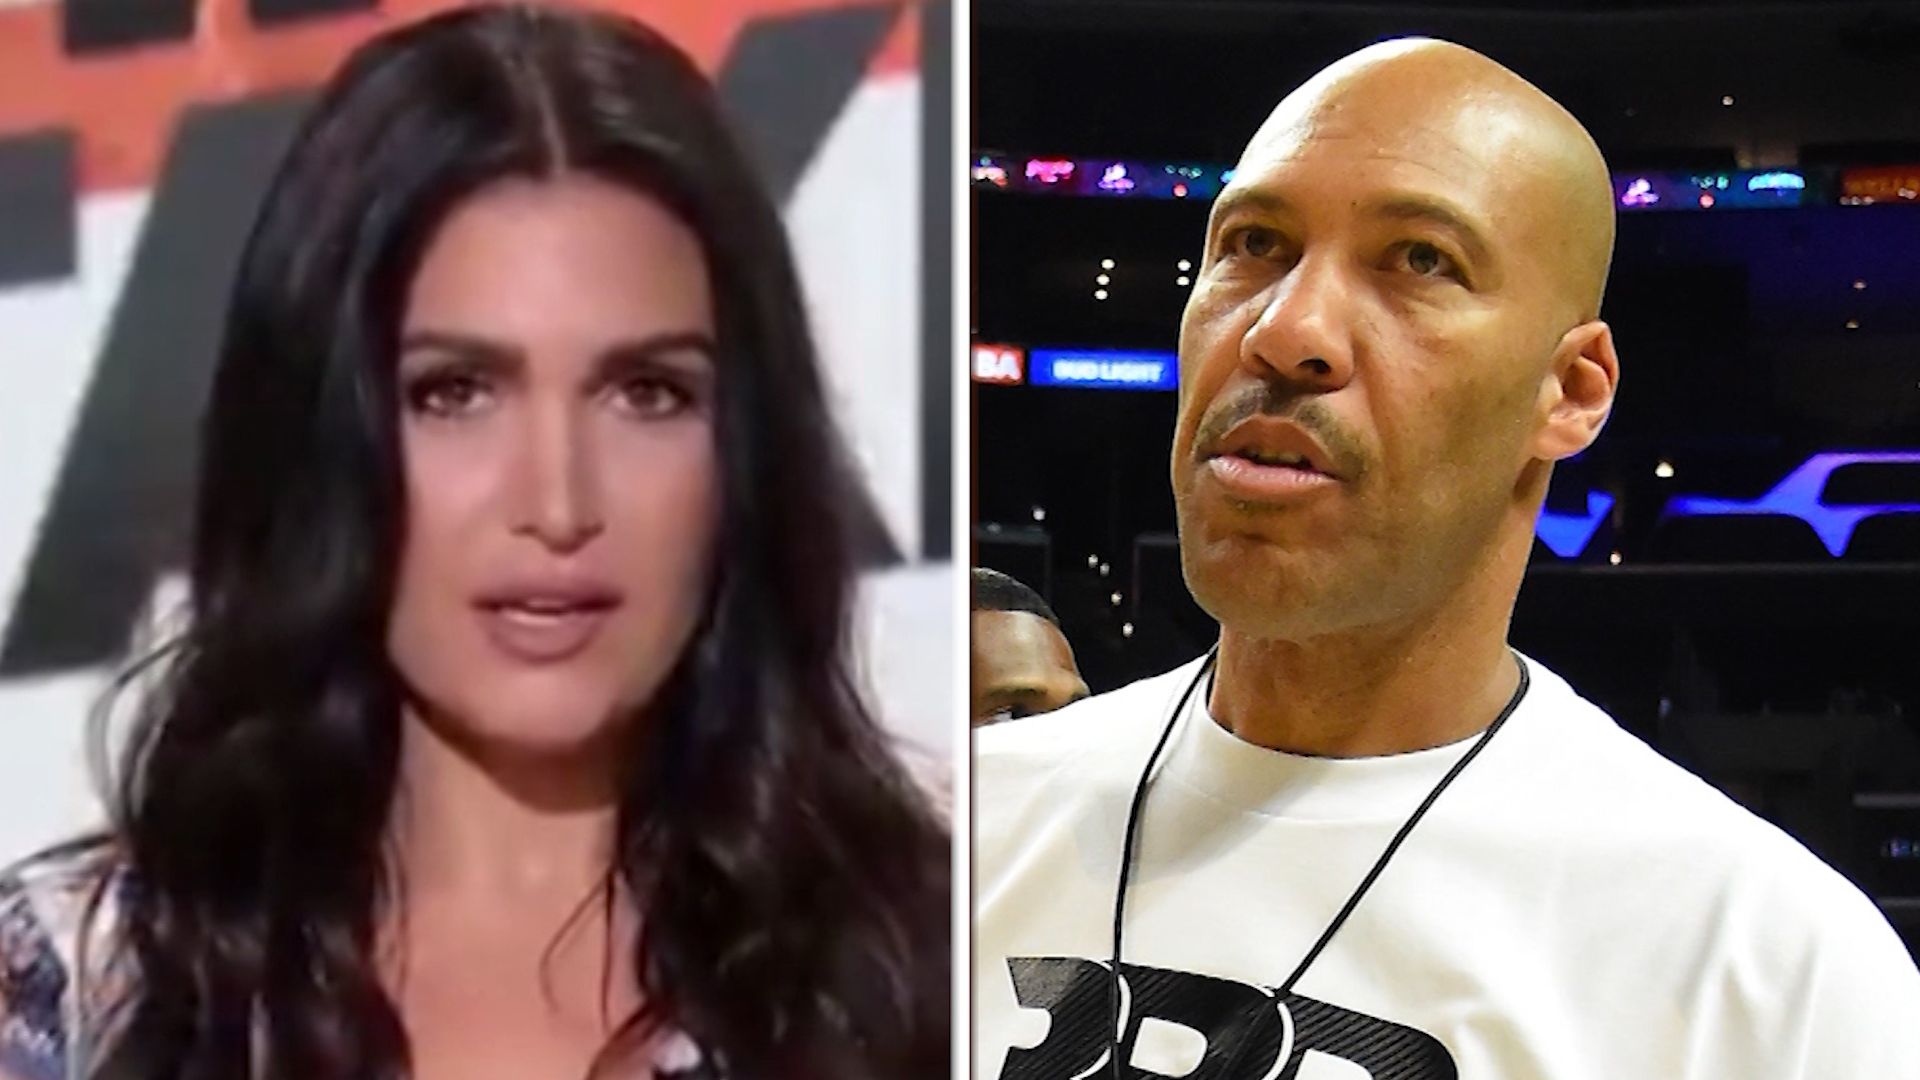 Facebook Airs New Reality Show Starring LaVar Ball & Family - The Source